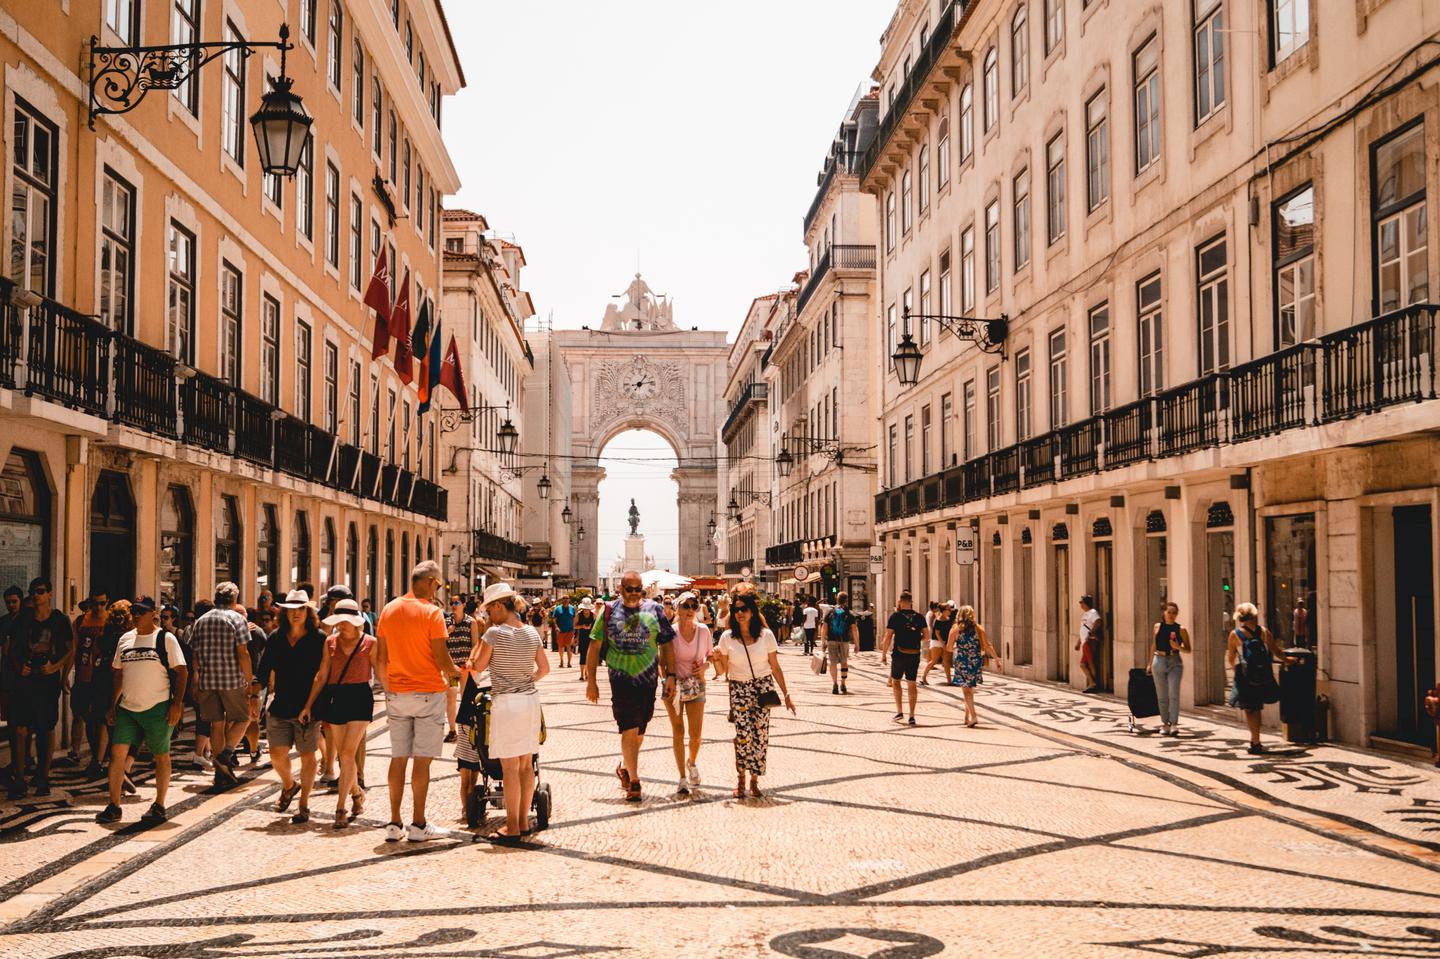 Portugal is the most affordable country in Western Europe